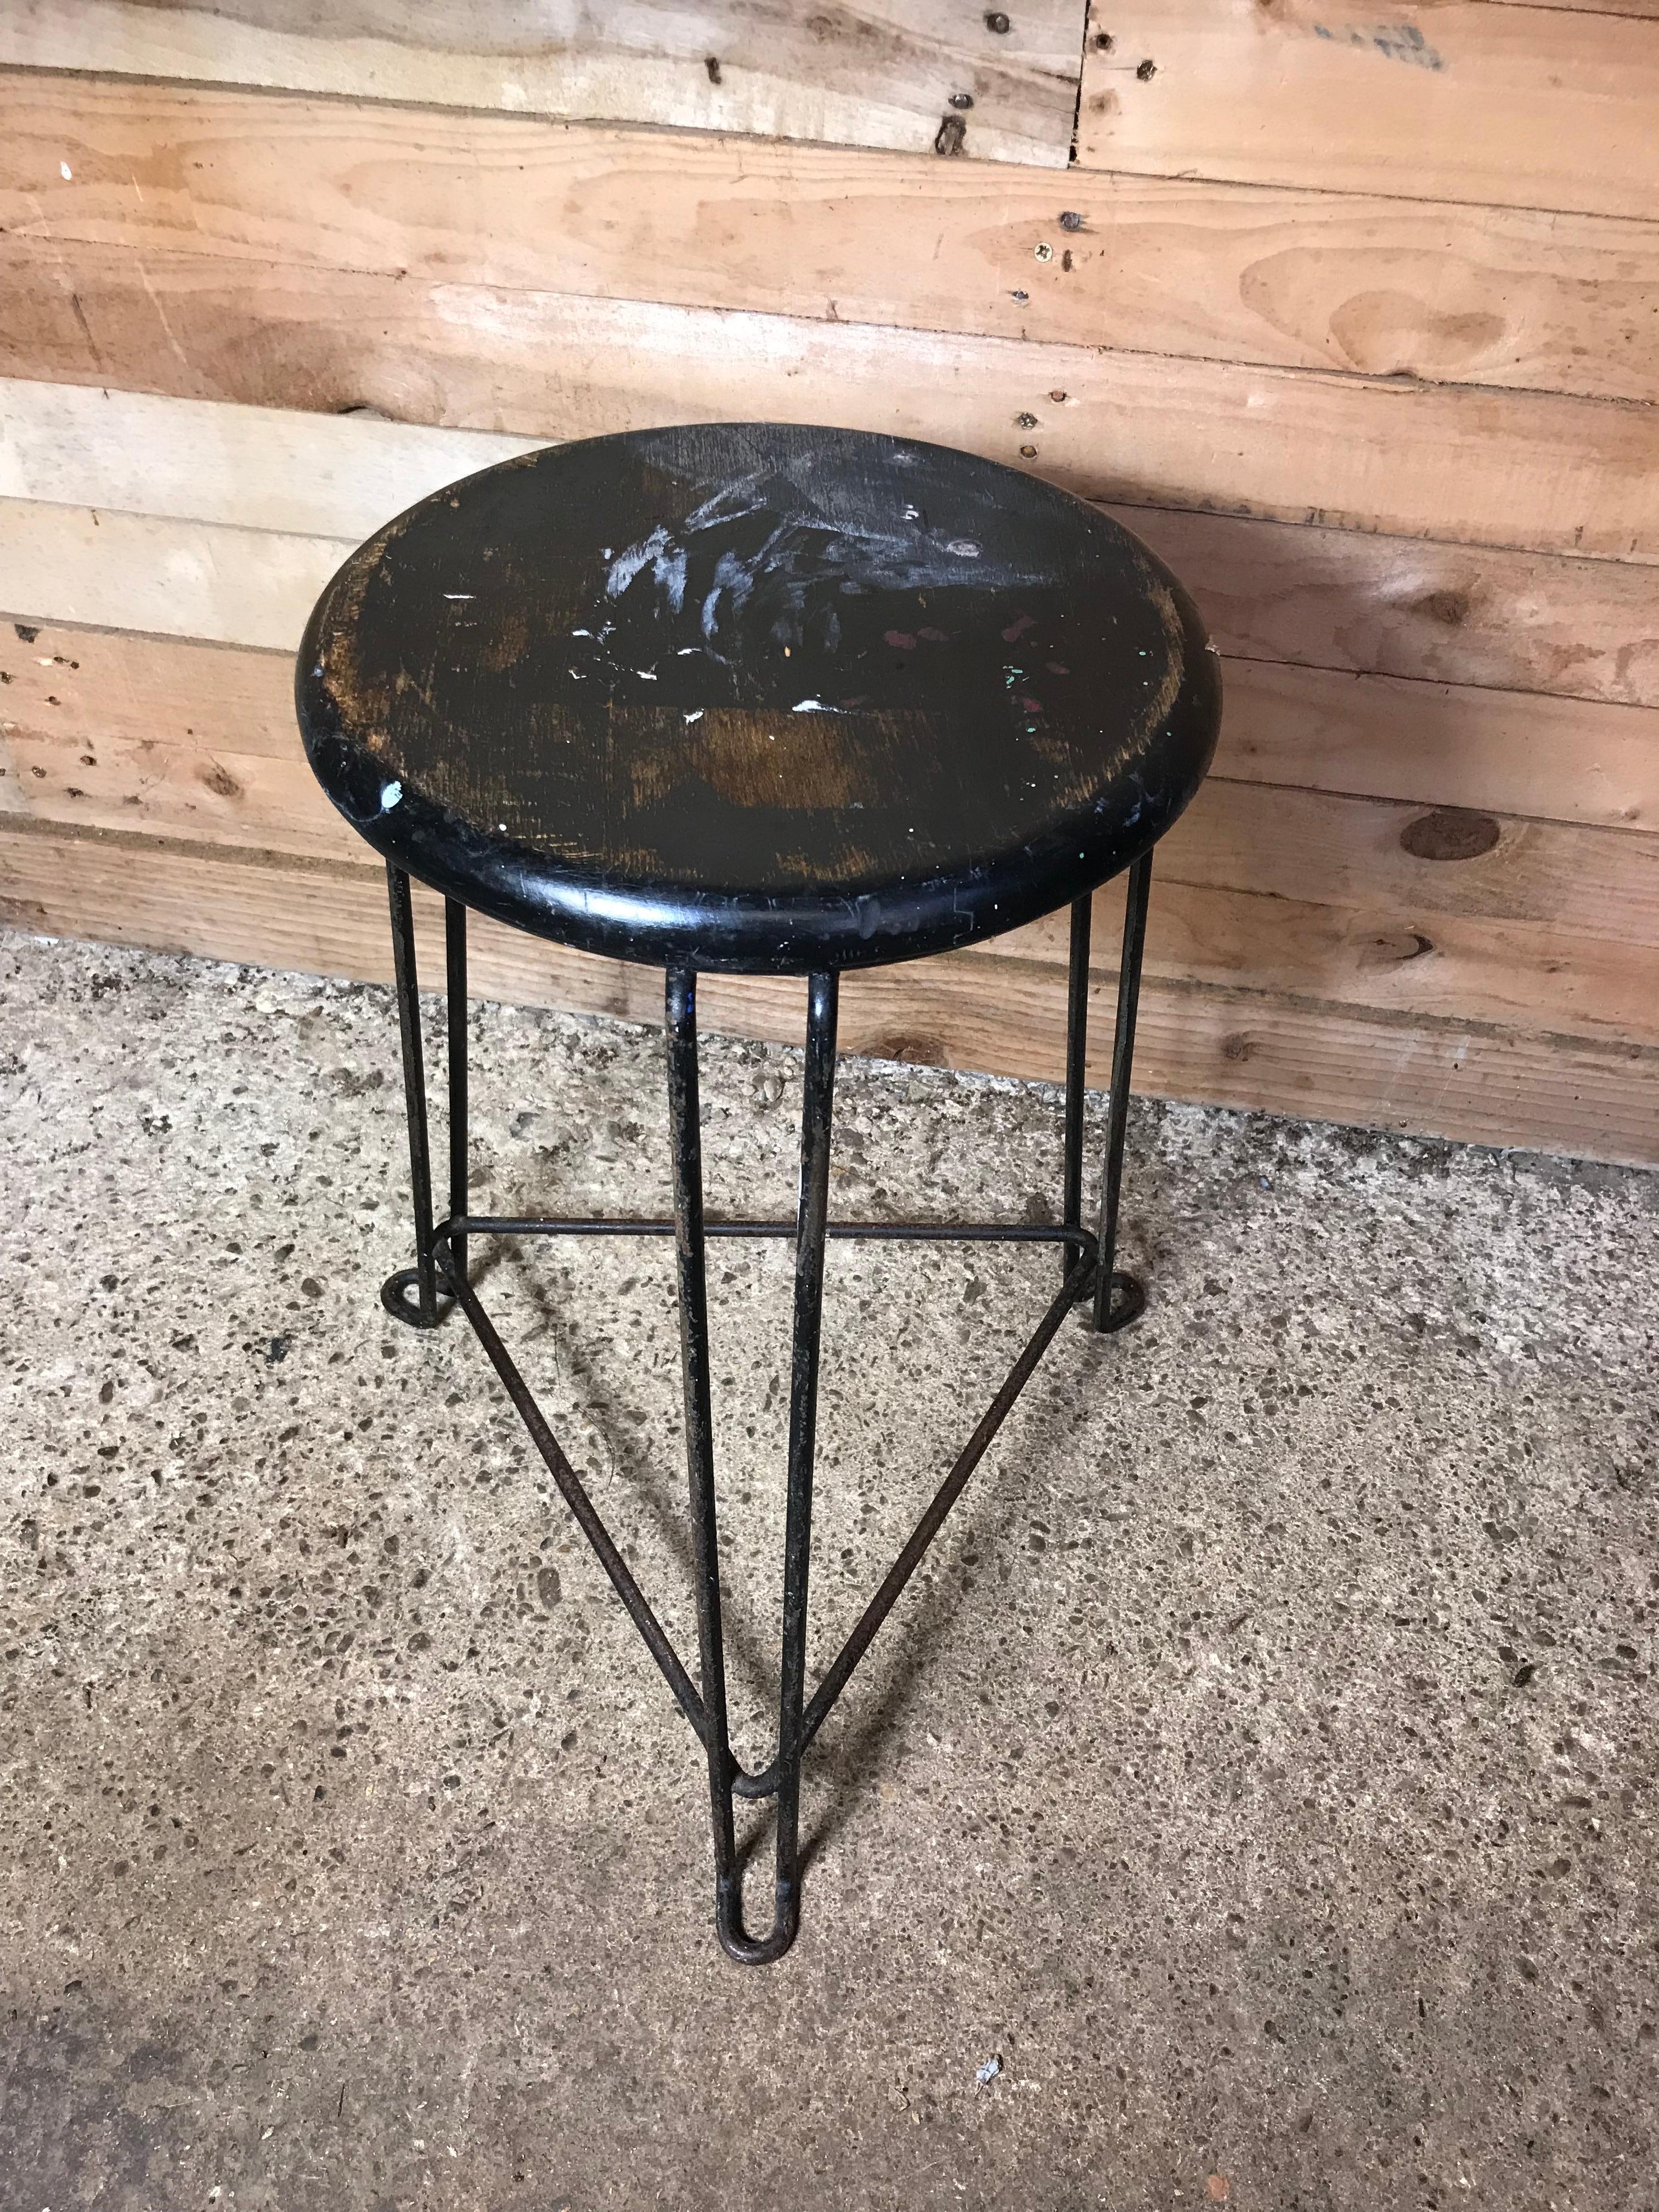 Set of 4 Retro 1960s Wooden Seat with Metal Frame Tomado Stools In Good Condition For Sale In Markington, GB